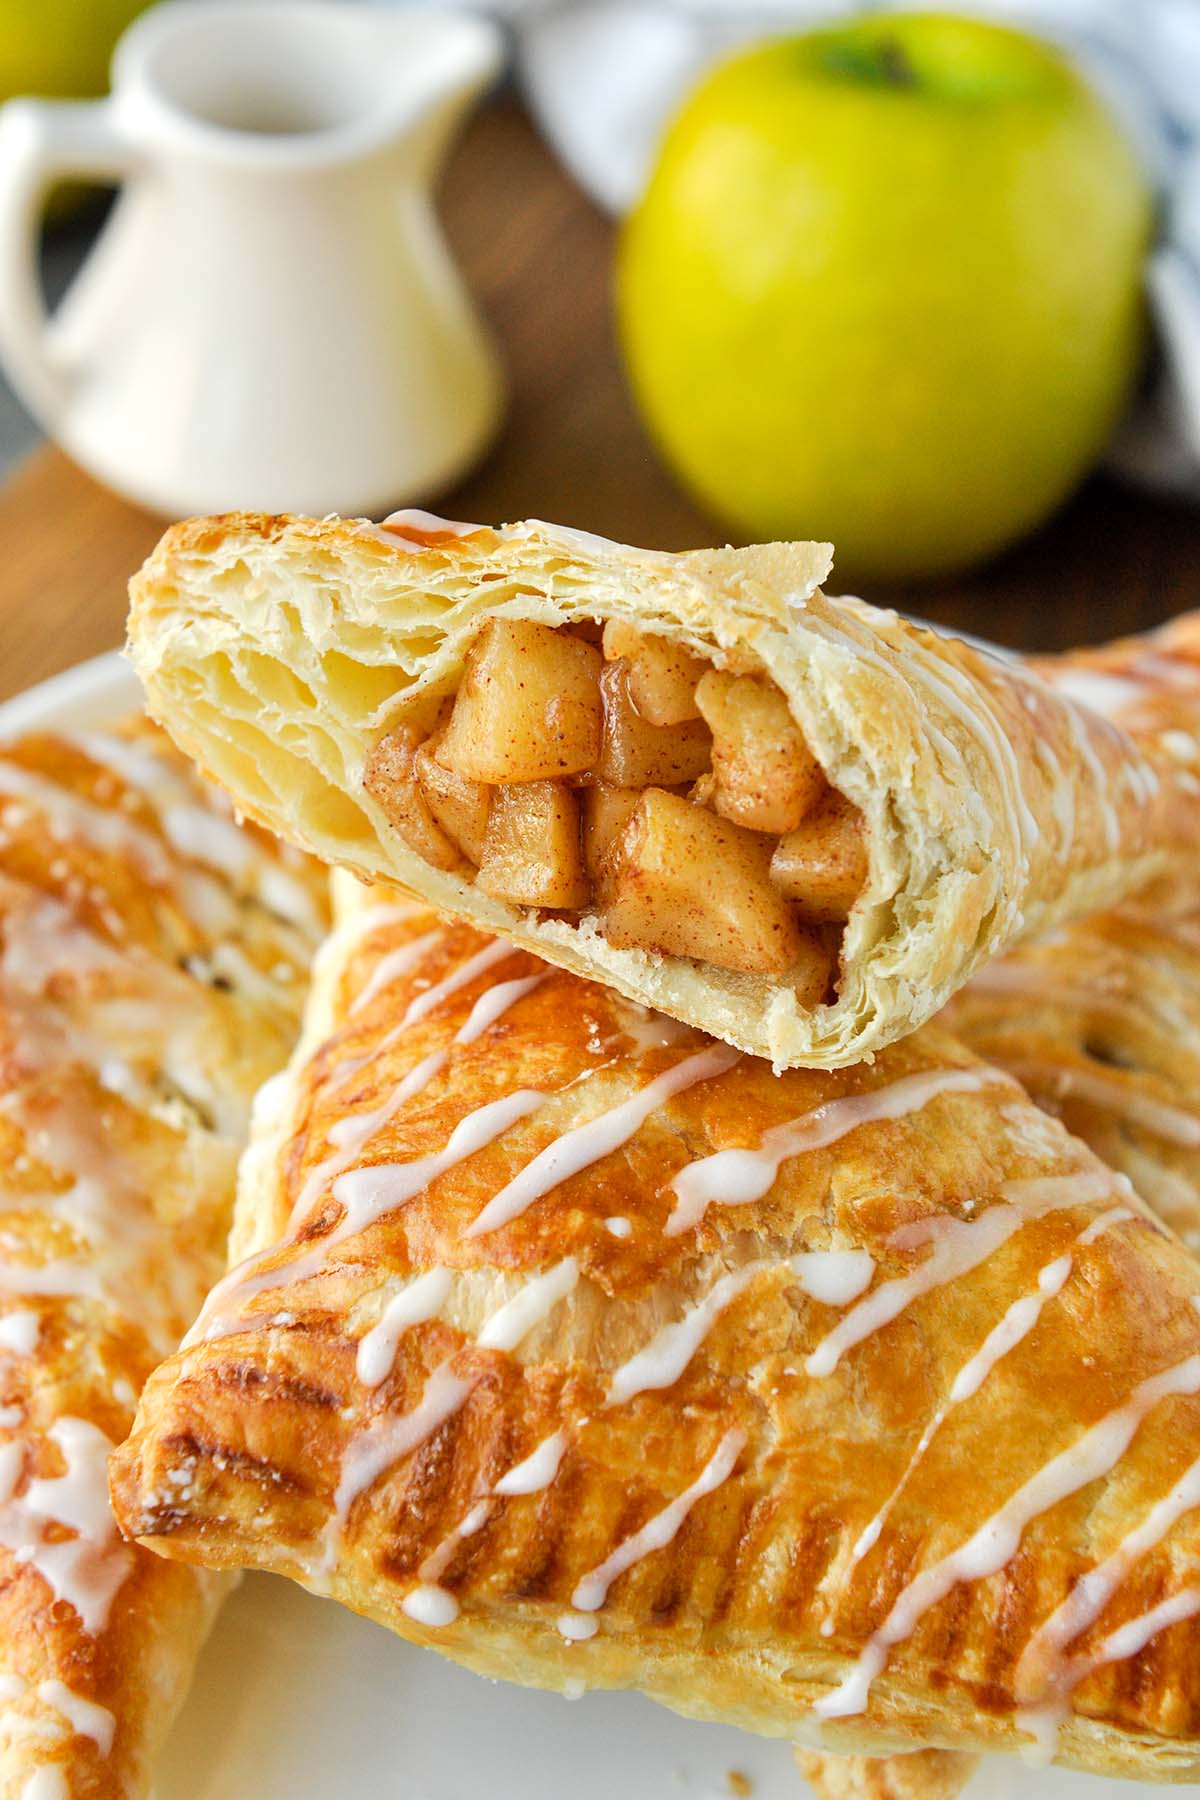 Half of an apple puff pastry on top of other pastries with an apple in the background.